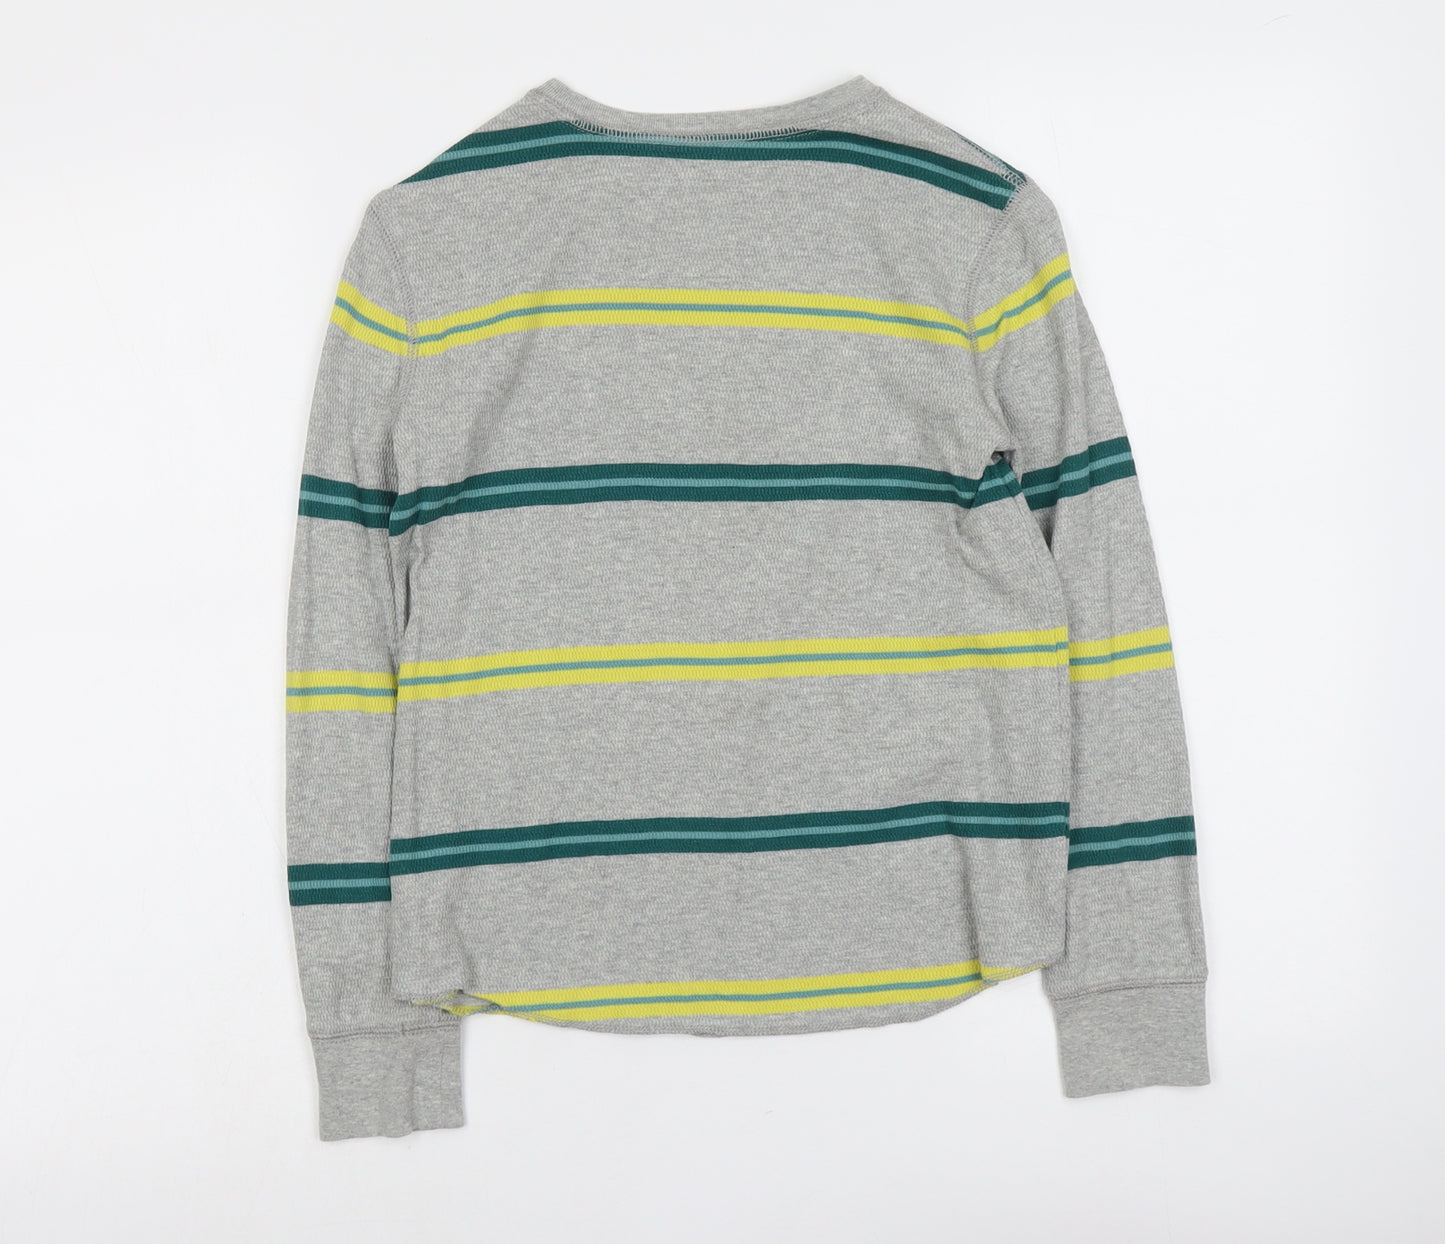 Gap Boys Grey Striped Cotton Pullover T-Shirt Size 8-9 Years Round Neck Pullover